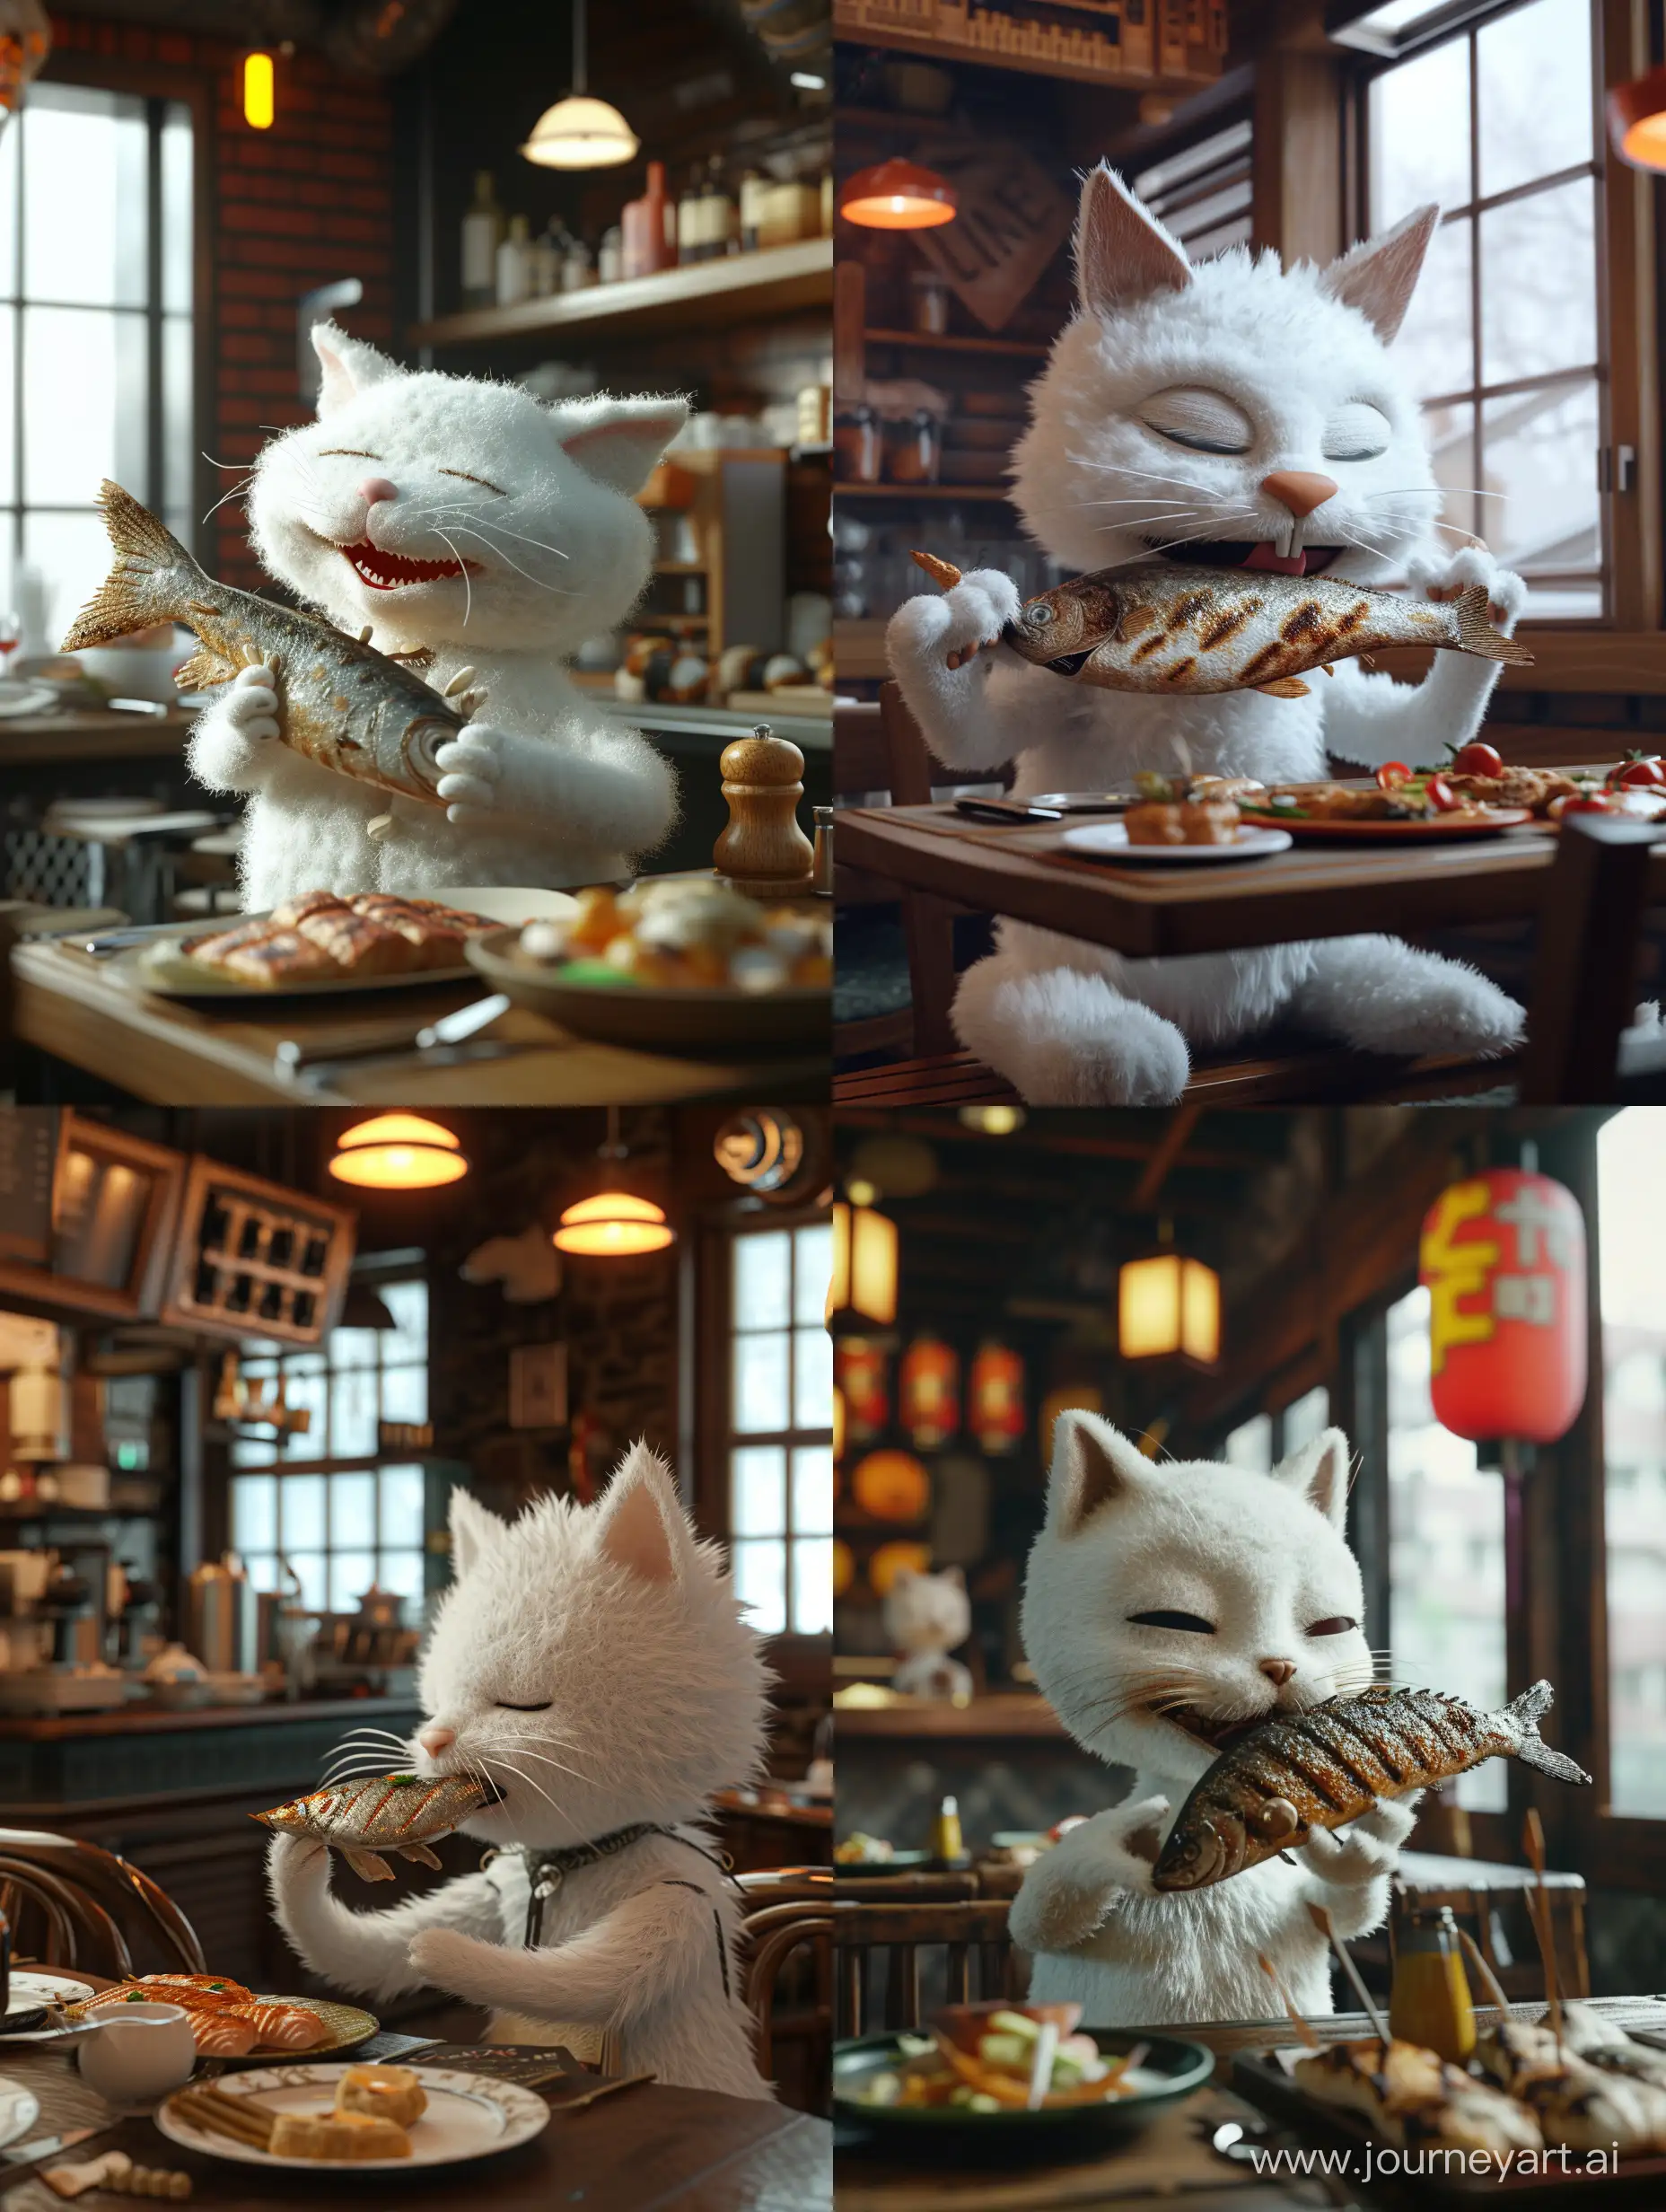 Anthropomorphized-White-Puppet-Cat-Enjoying-Grilled-Fish-in-Warm-Restaurant-Setting